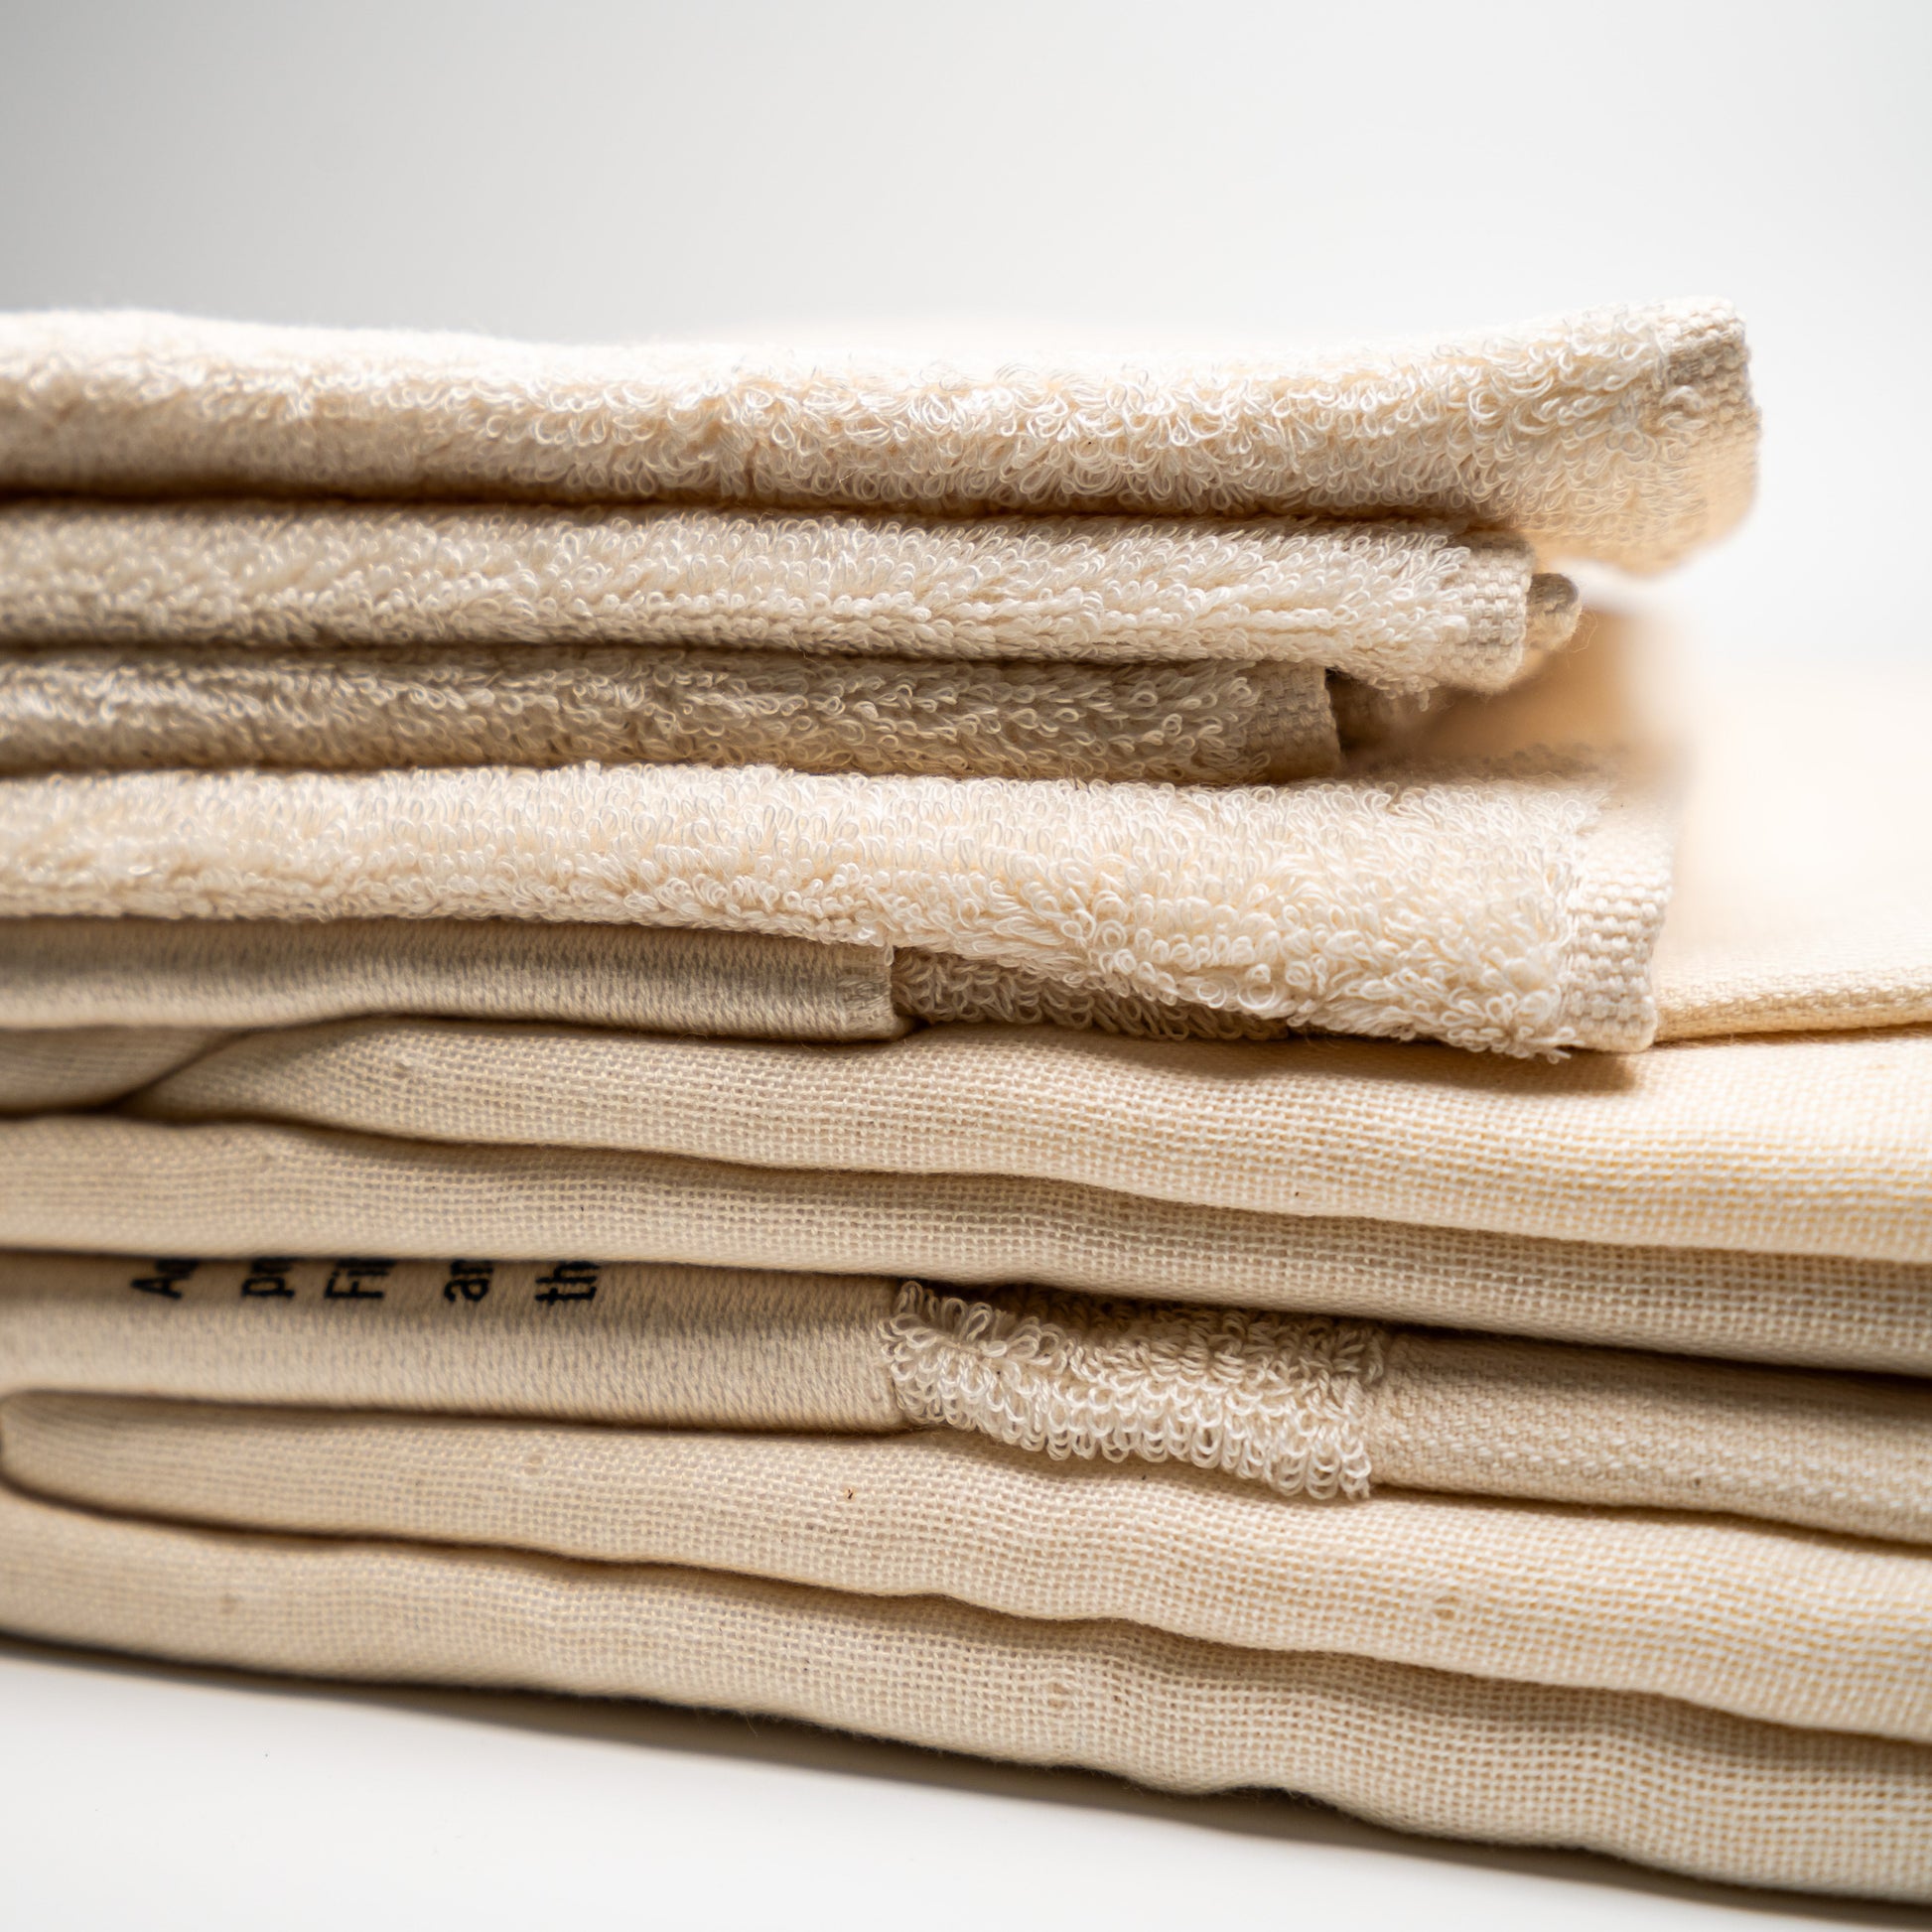 A stack of natural Filhiba towels on a white background